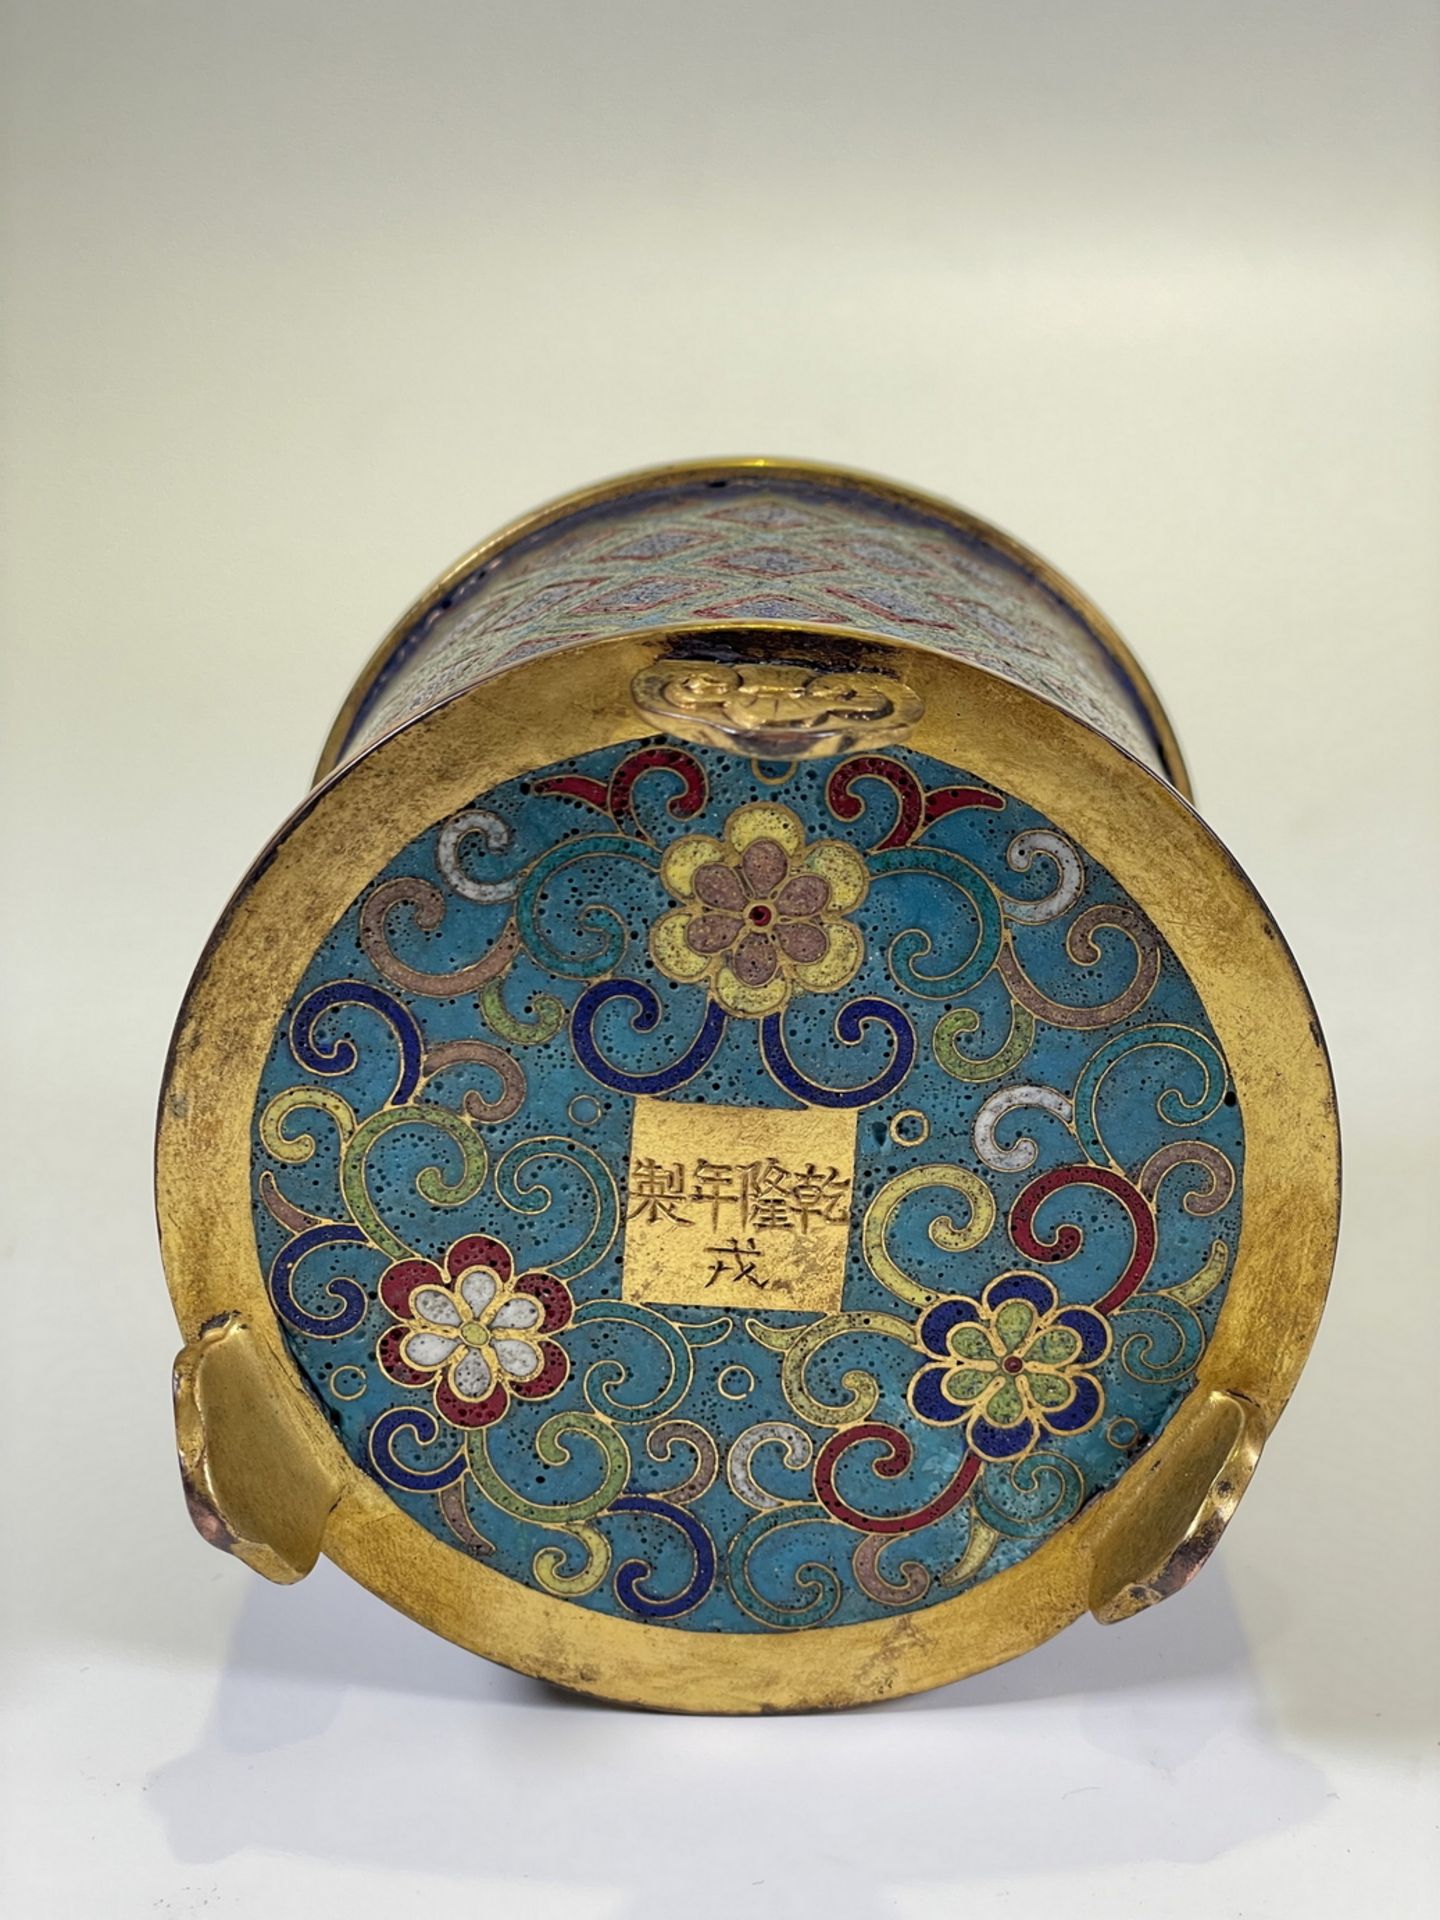 FINE CHINESE CLOISONNE, 18TH/19TH Century Pr. Collection of NARA private gallary.  - Image 6 of 11